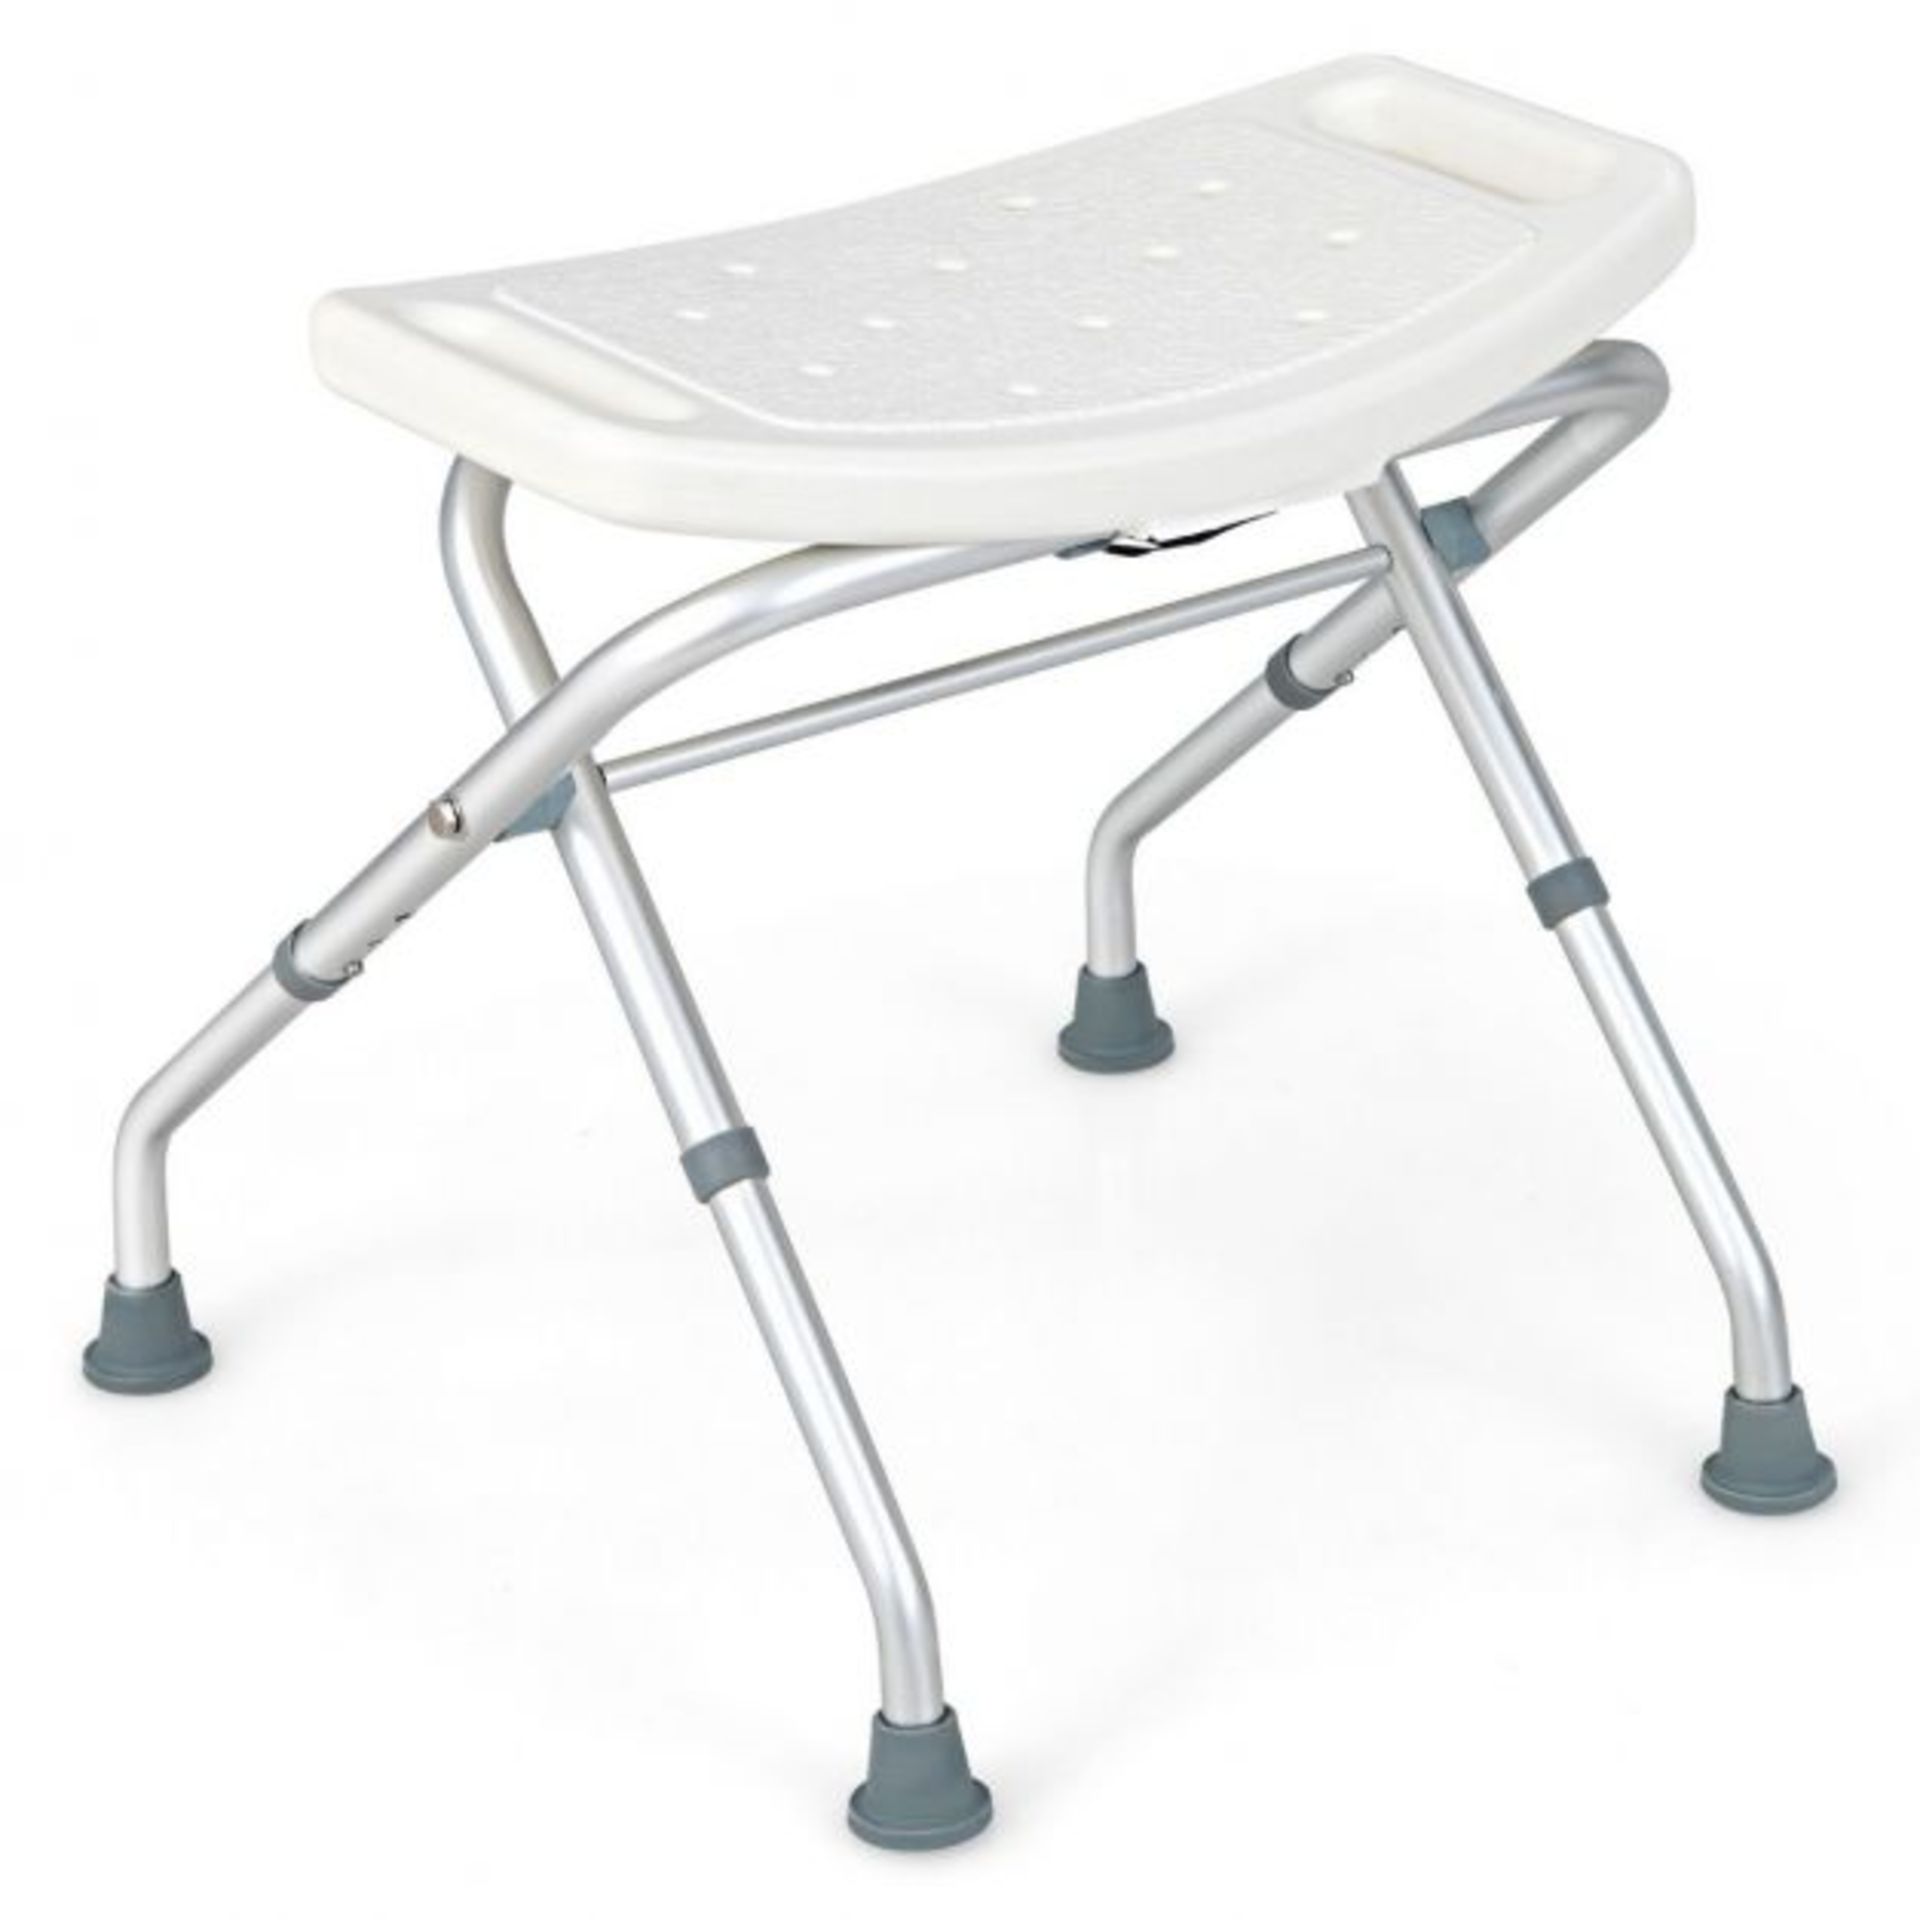 Folding Portable Shower Seat with Adjustable Height for Bathroom. - R14.6.